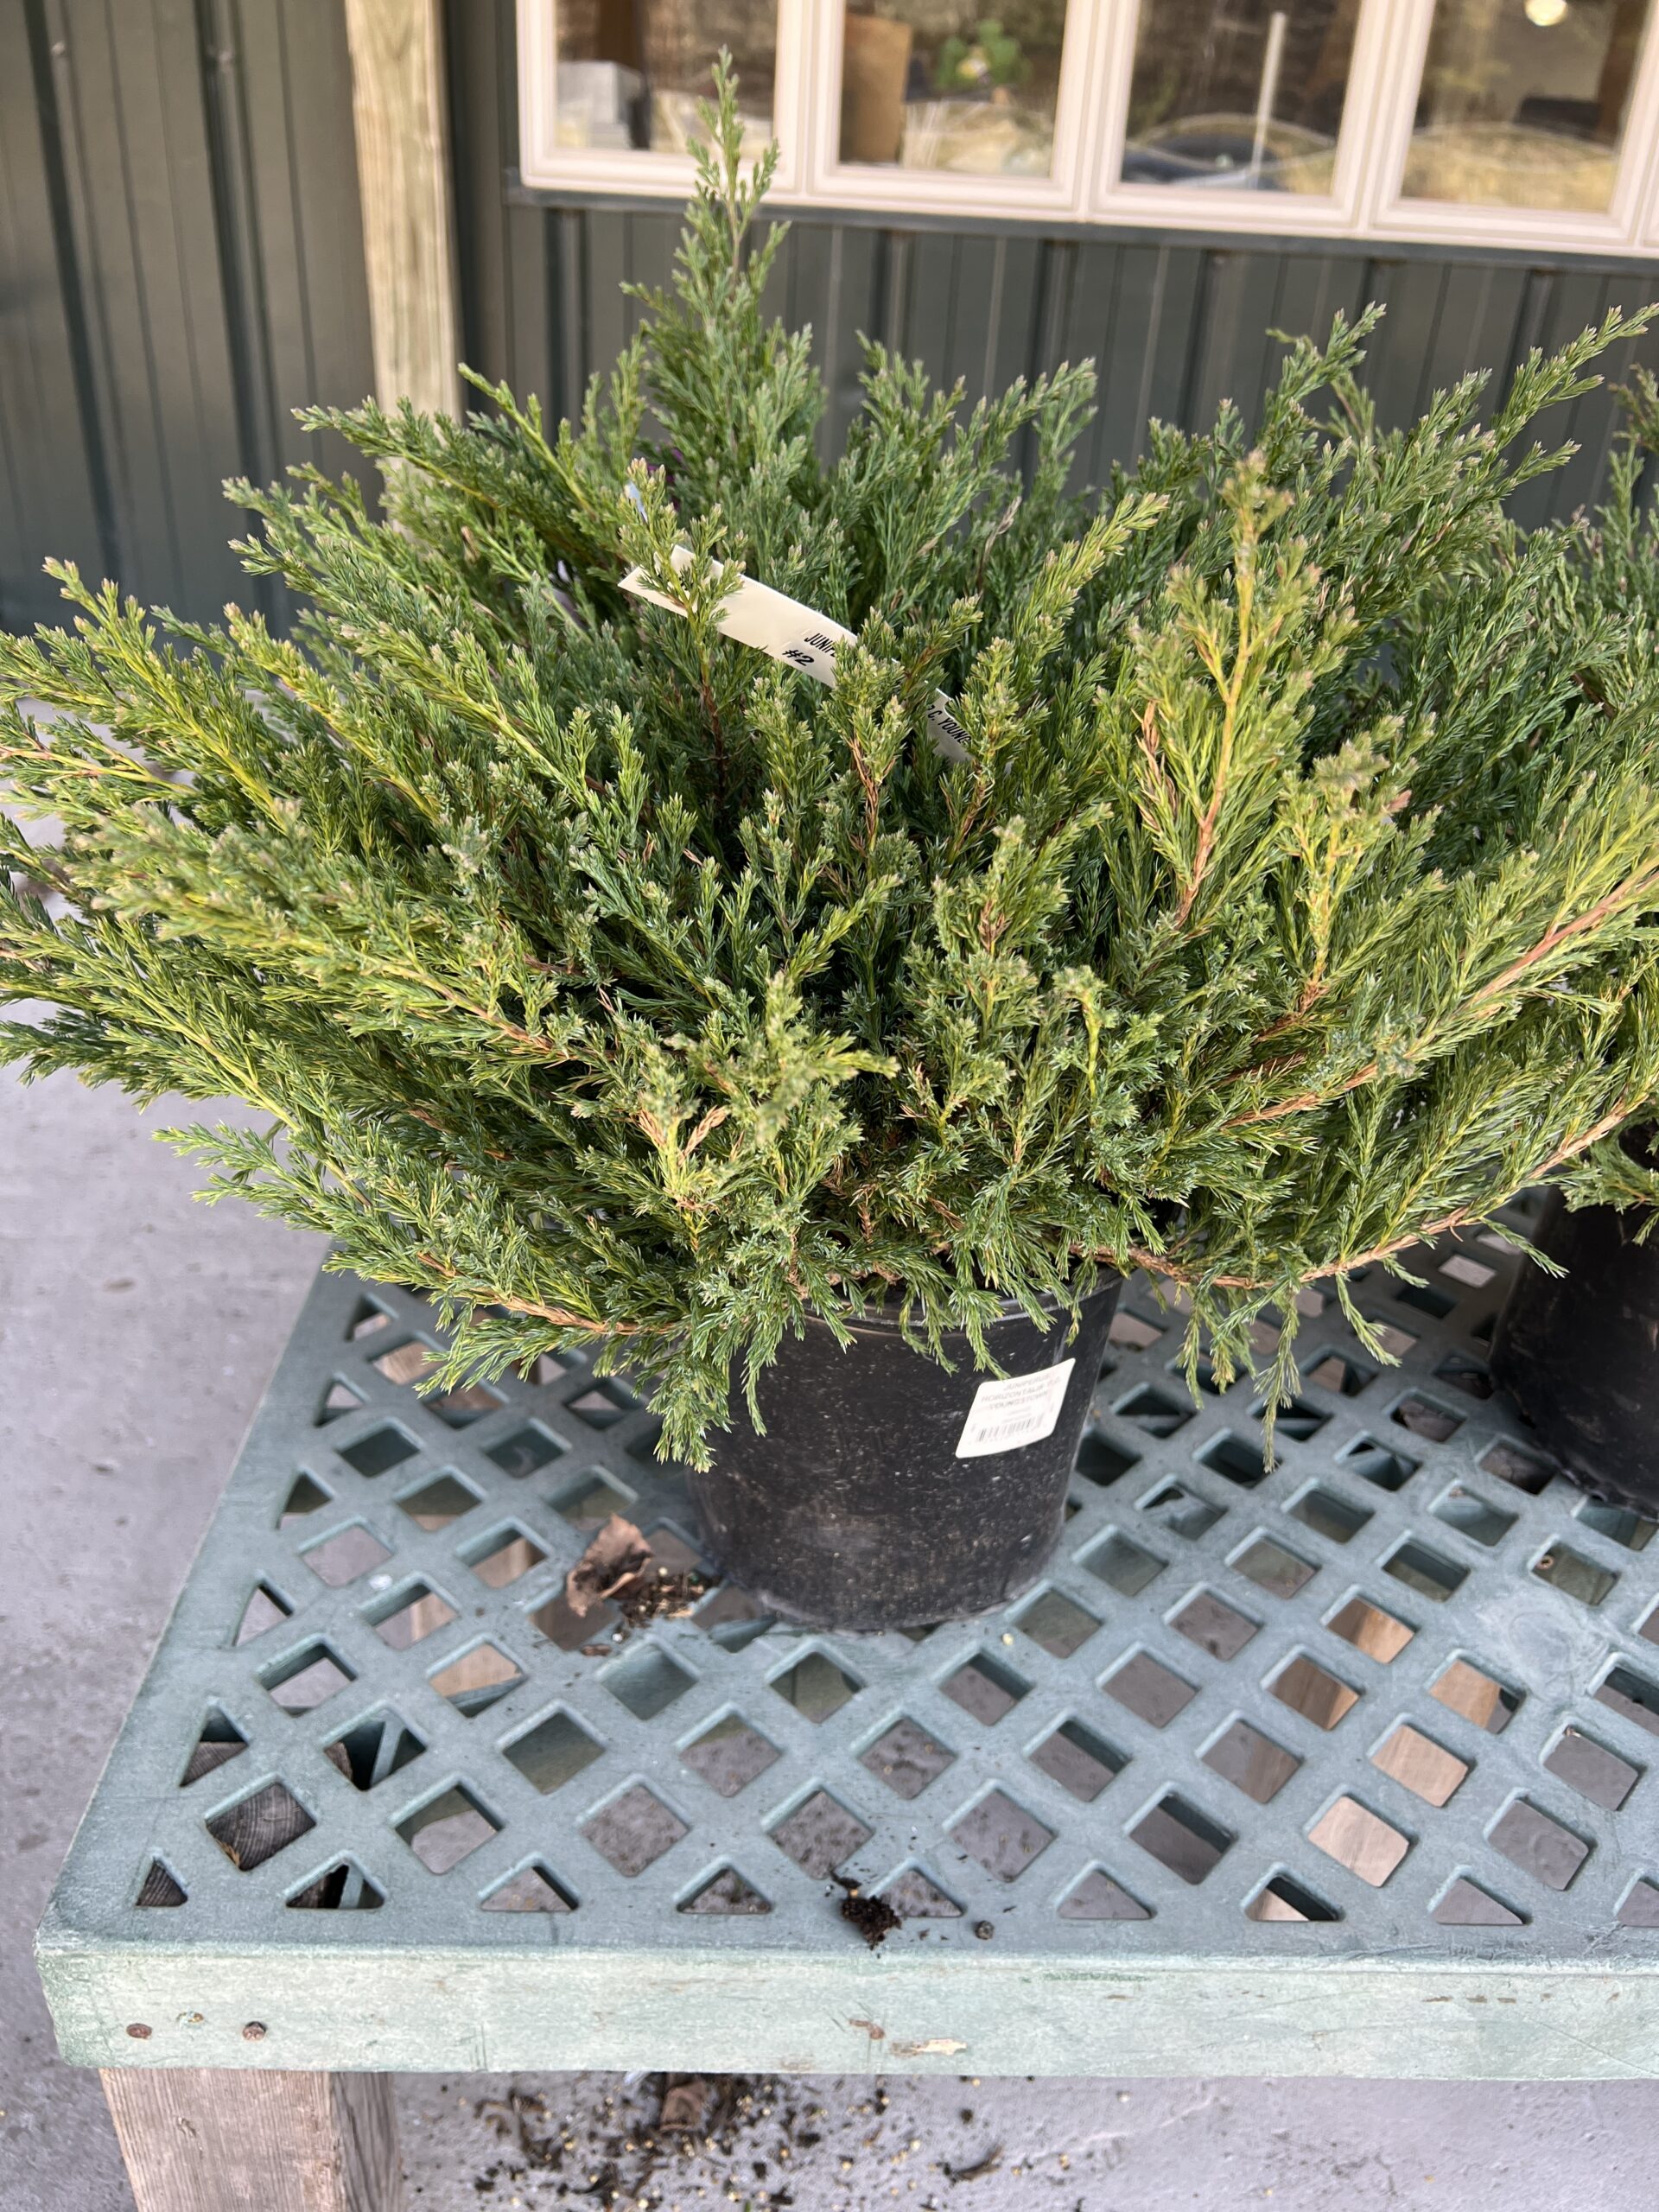 This Compact Andorra Juniper was found at a “home” center. Grown in a 2-gallon pot, it appears to be healthy and a good candidate for planting. But what does the root system look like? ANDREW MESSINGER